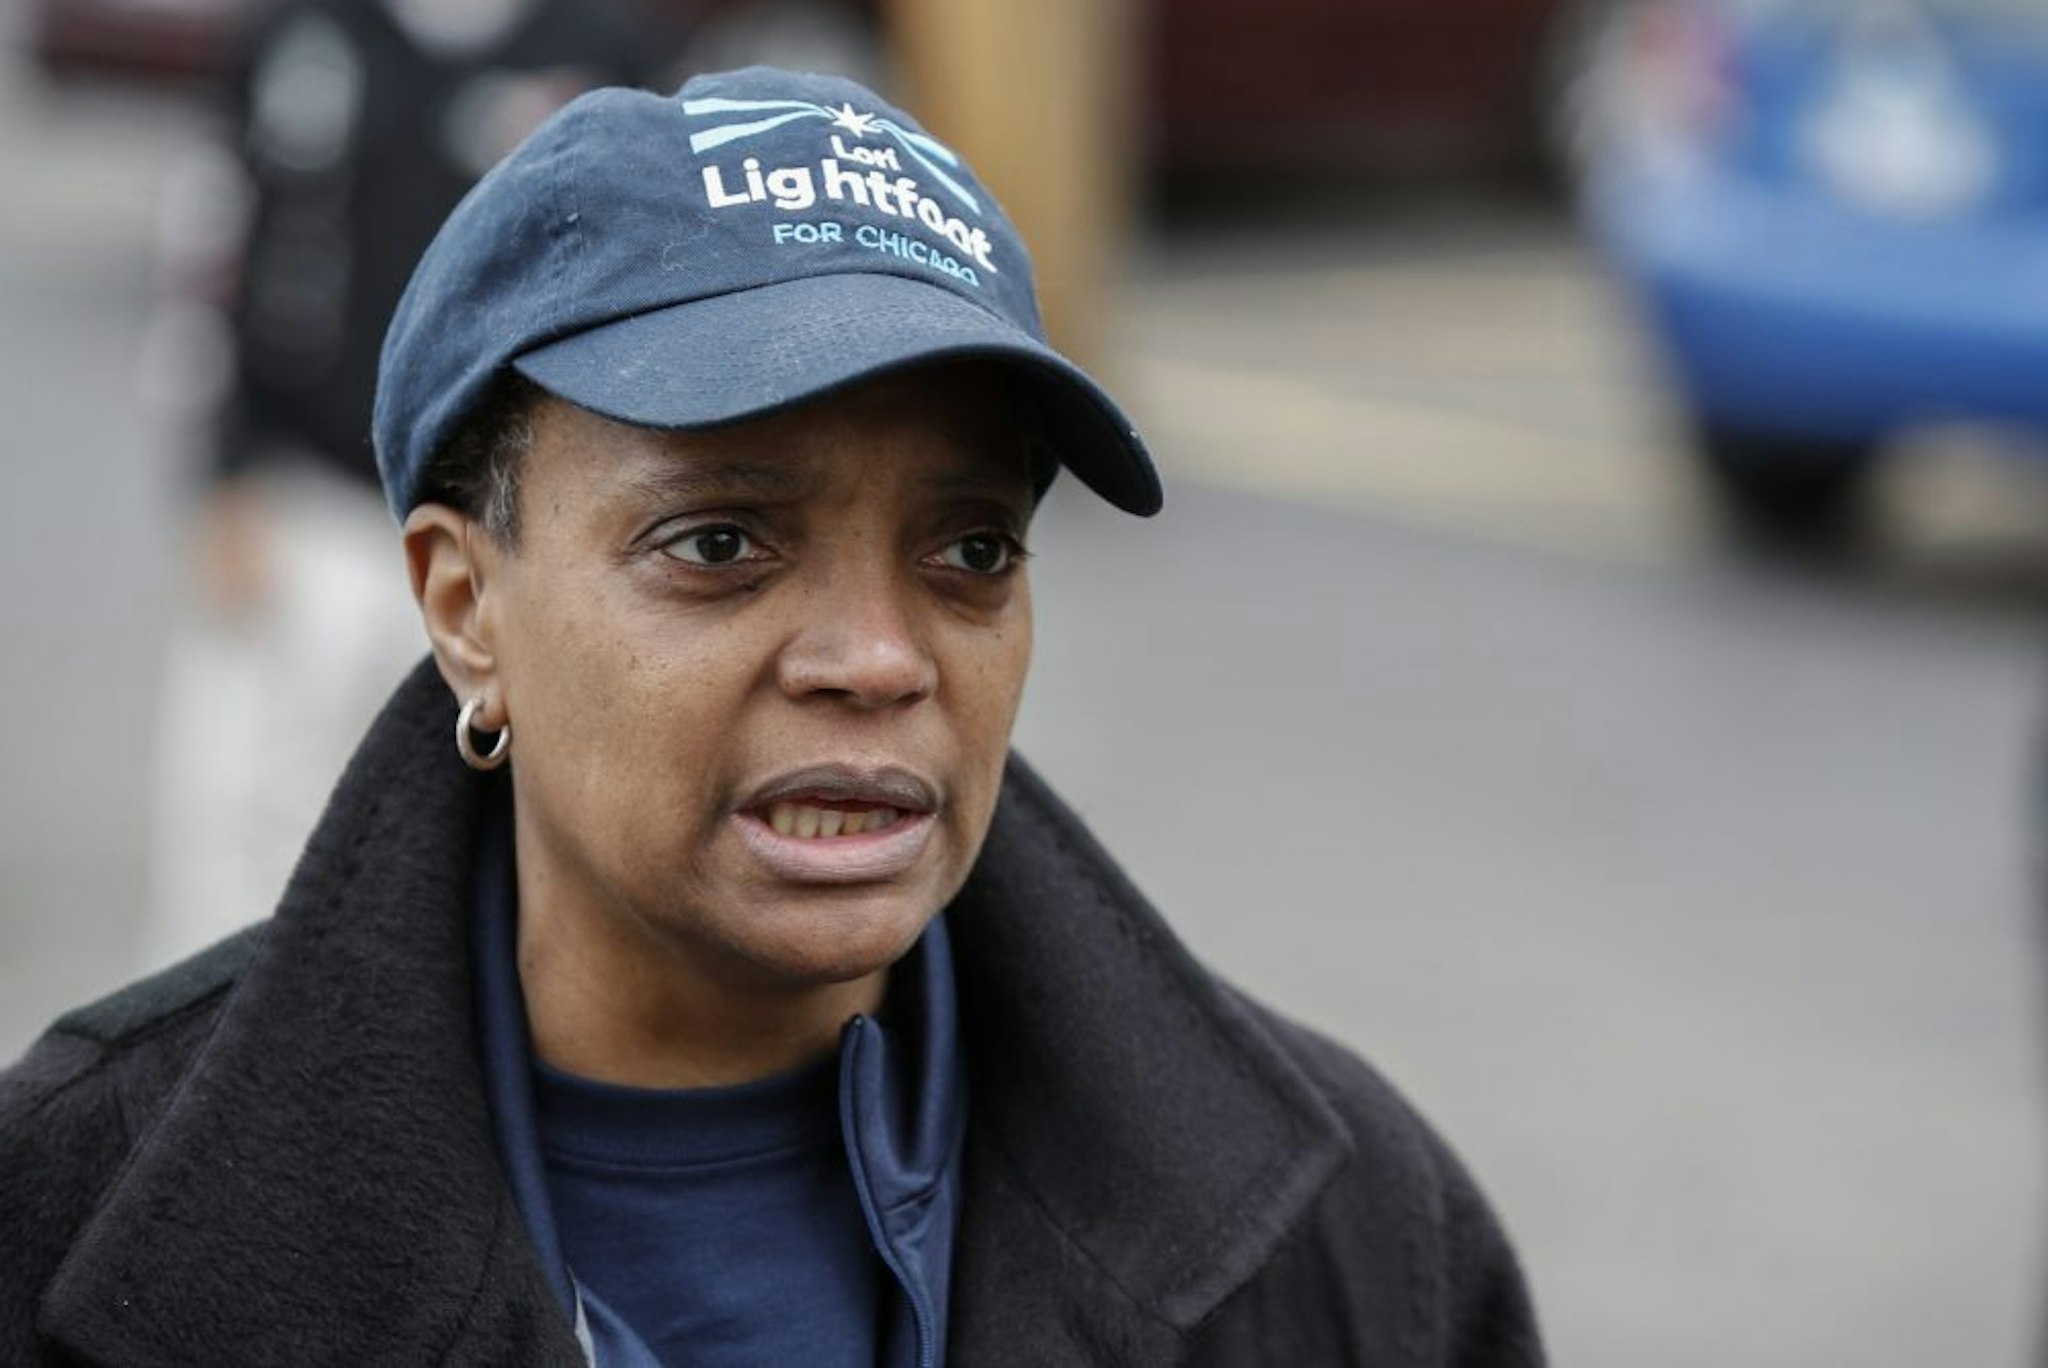 Chicago mayoral candidate Lori Lightfoot speaks to the press outside of the polling place at the Saint Richard Catholic Church in Chicago, Illinois on April 2, 2019. - Chicago residents went to the polls in a runoff election Tuesday to elect the US city's first black female mayor in a historic vote centered on issues of economic equality, race and gun violence. Lightfoot and Toni Preckwinkle, both African-American women, are competing for the top elected post in the city. (Photo by Kamil Krzaczynski / AFP) (Photo by KAMIL KRZACZYNSKI/AFP via Getty Images)